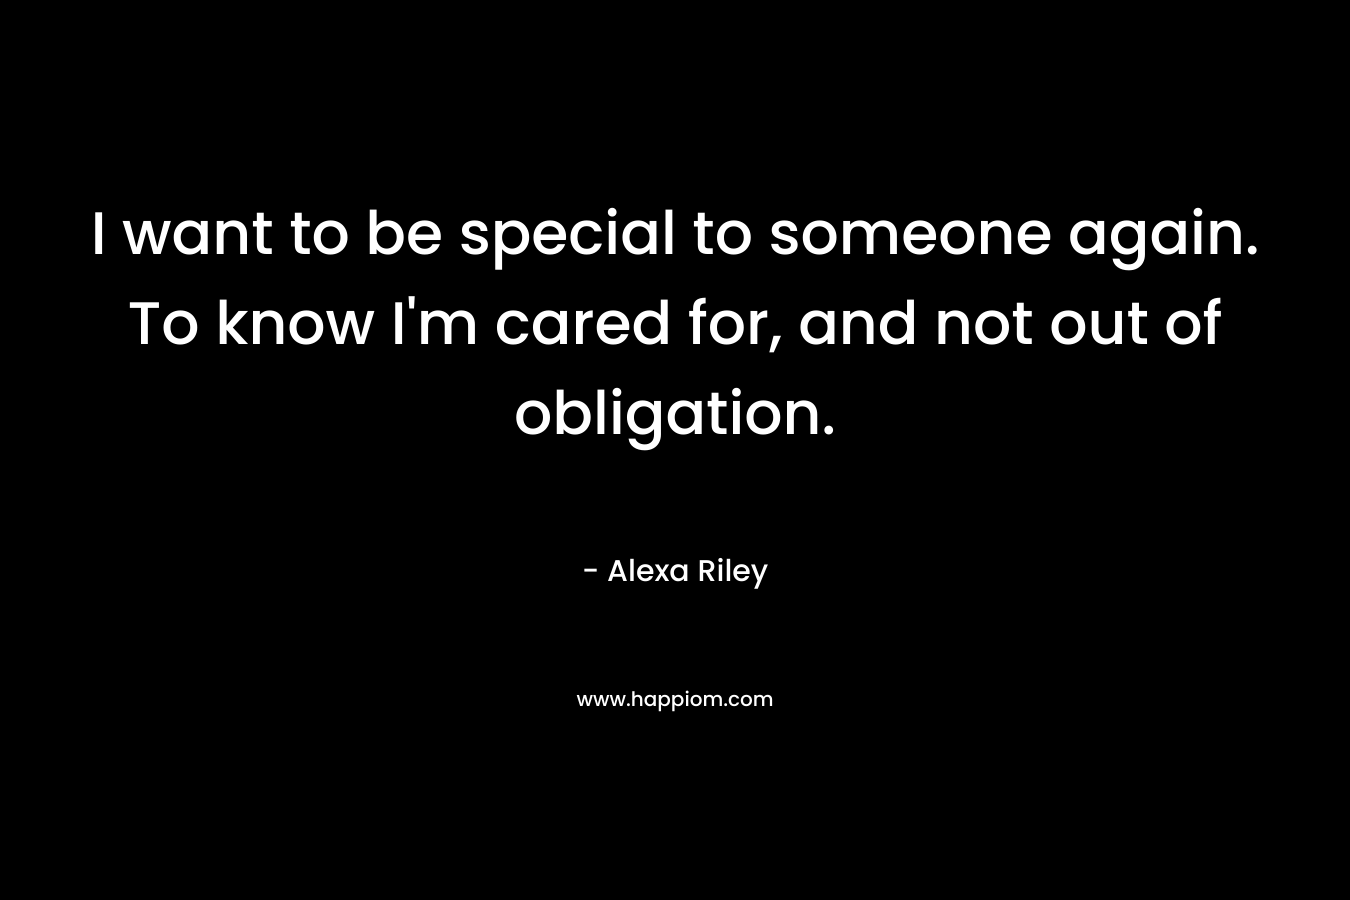 I want to be special to someone again. To know I’m cared for, and not out of obligation. – Alexa Riley